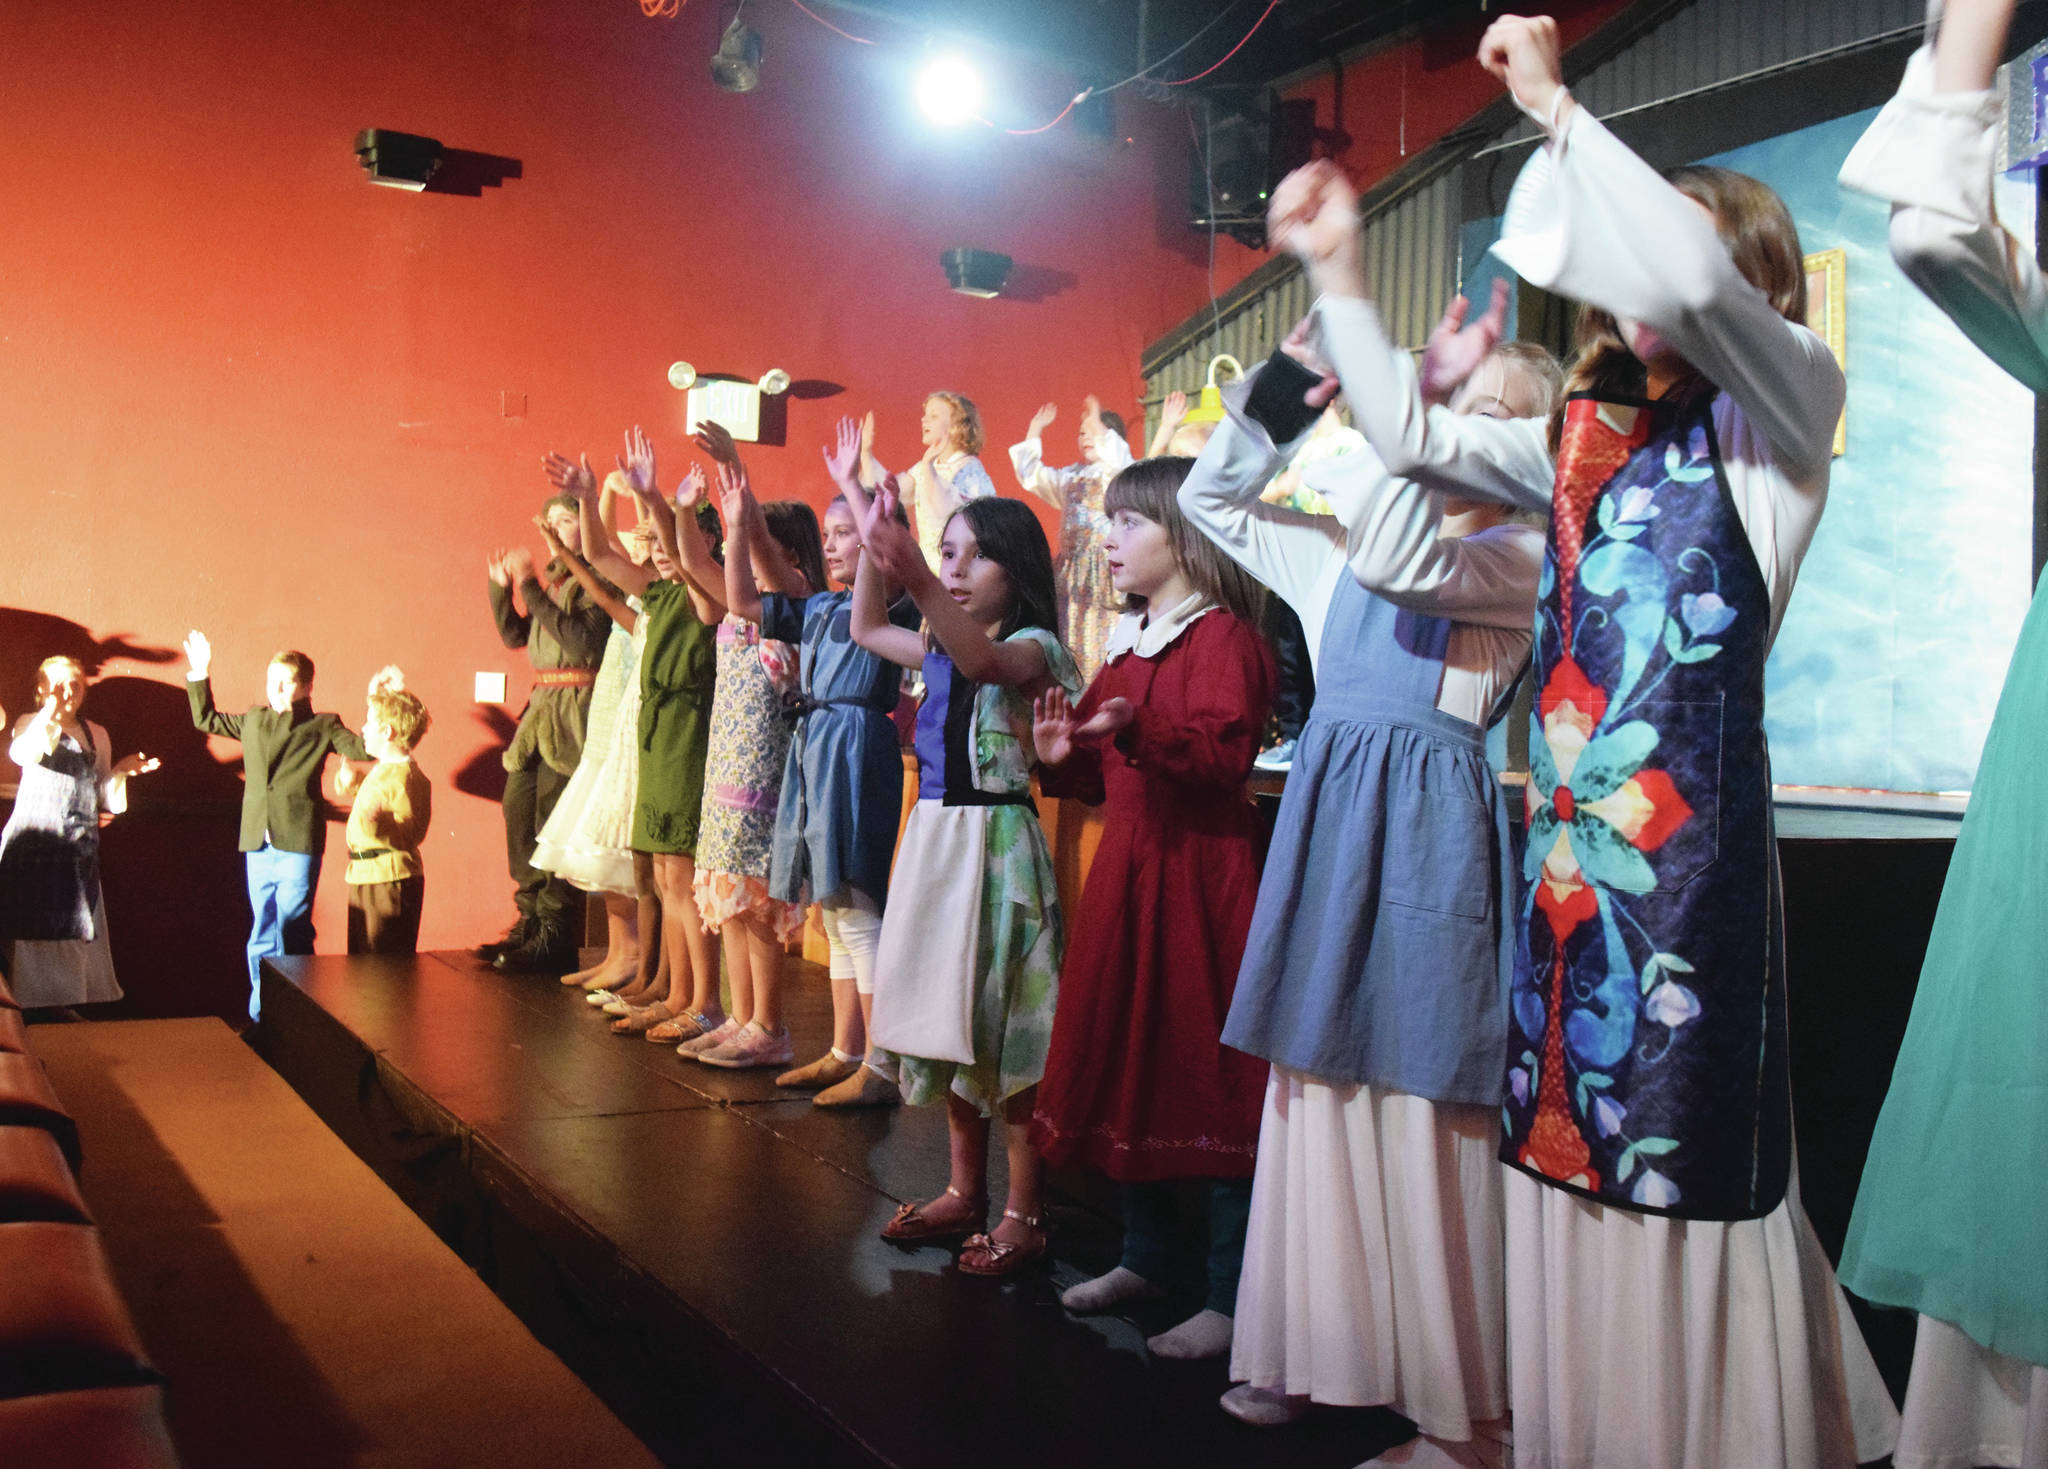 The youth cast of “Frozen Jr.” rehearse a scene Wednesday, Oct. 9, 2019, at the Triumvirate North theater in Kenai, Alaska. (Photo by Joey Klecka/Peninsula Clarion)